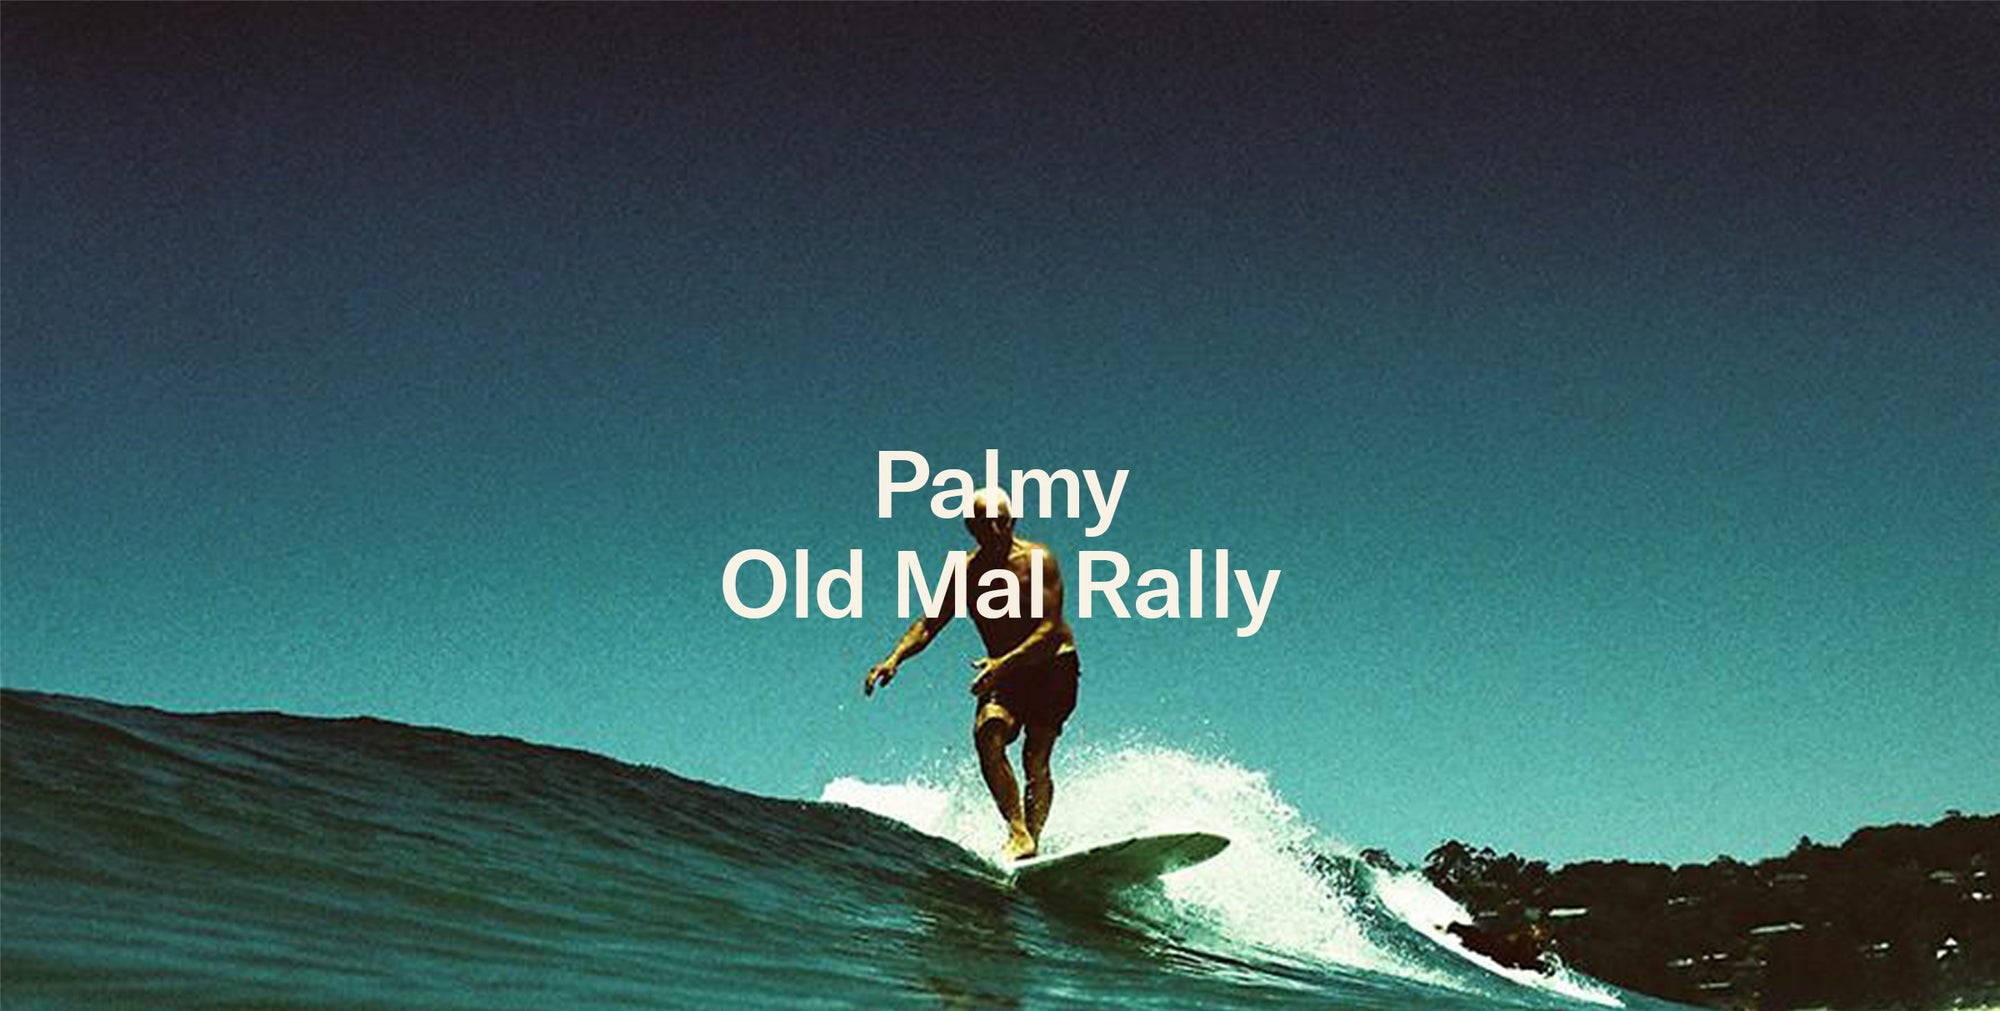 A day away - Palmy Old Mal Rally